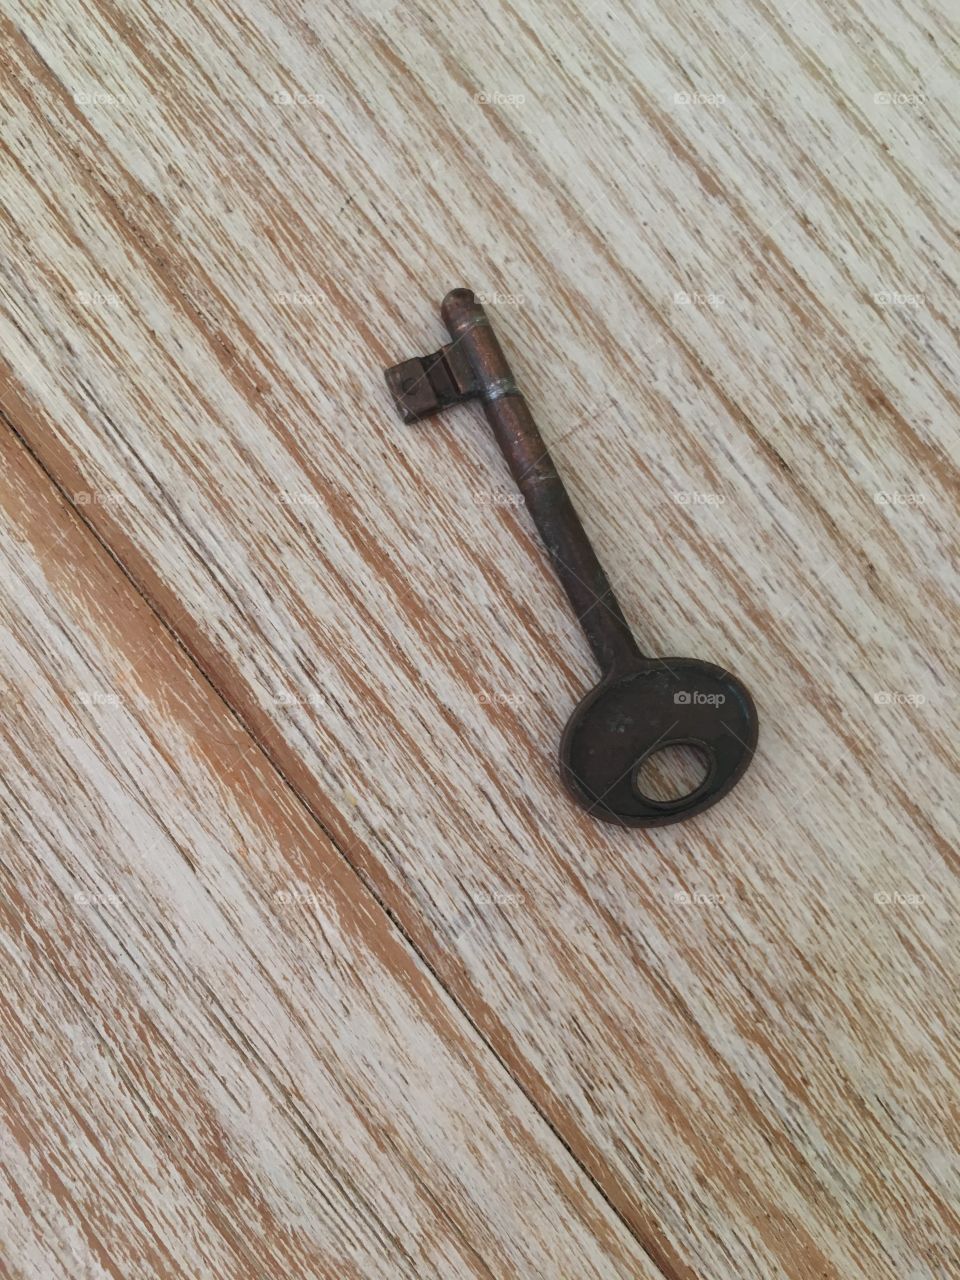 Old metal key on wooden table